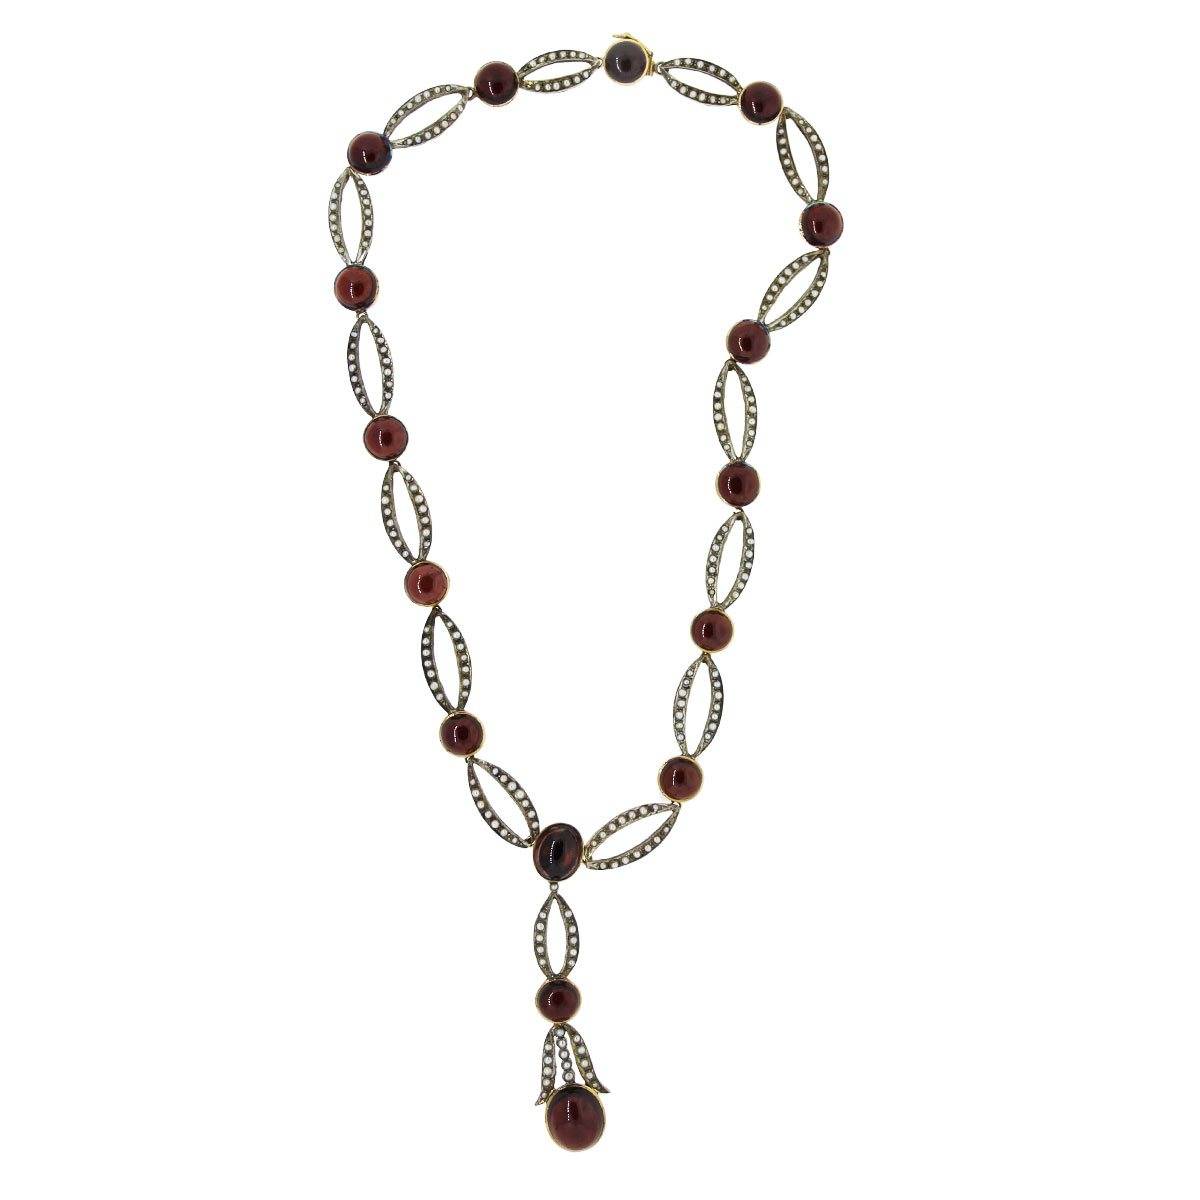 Garnet and Gold necklace